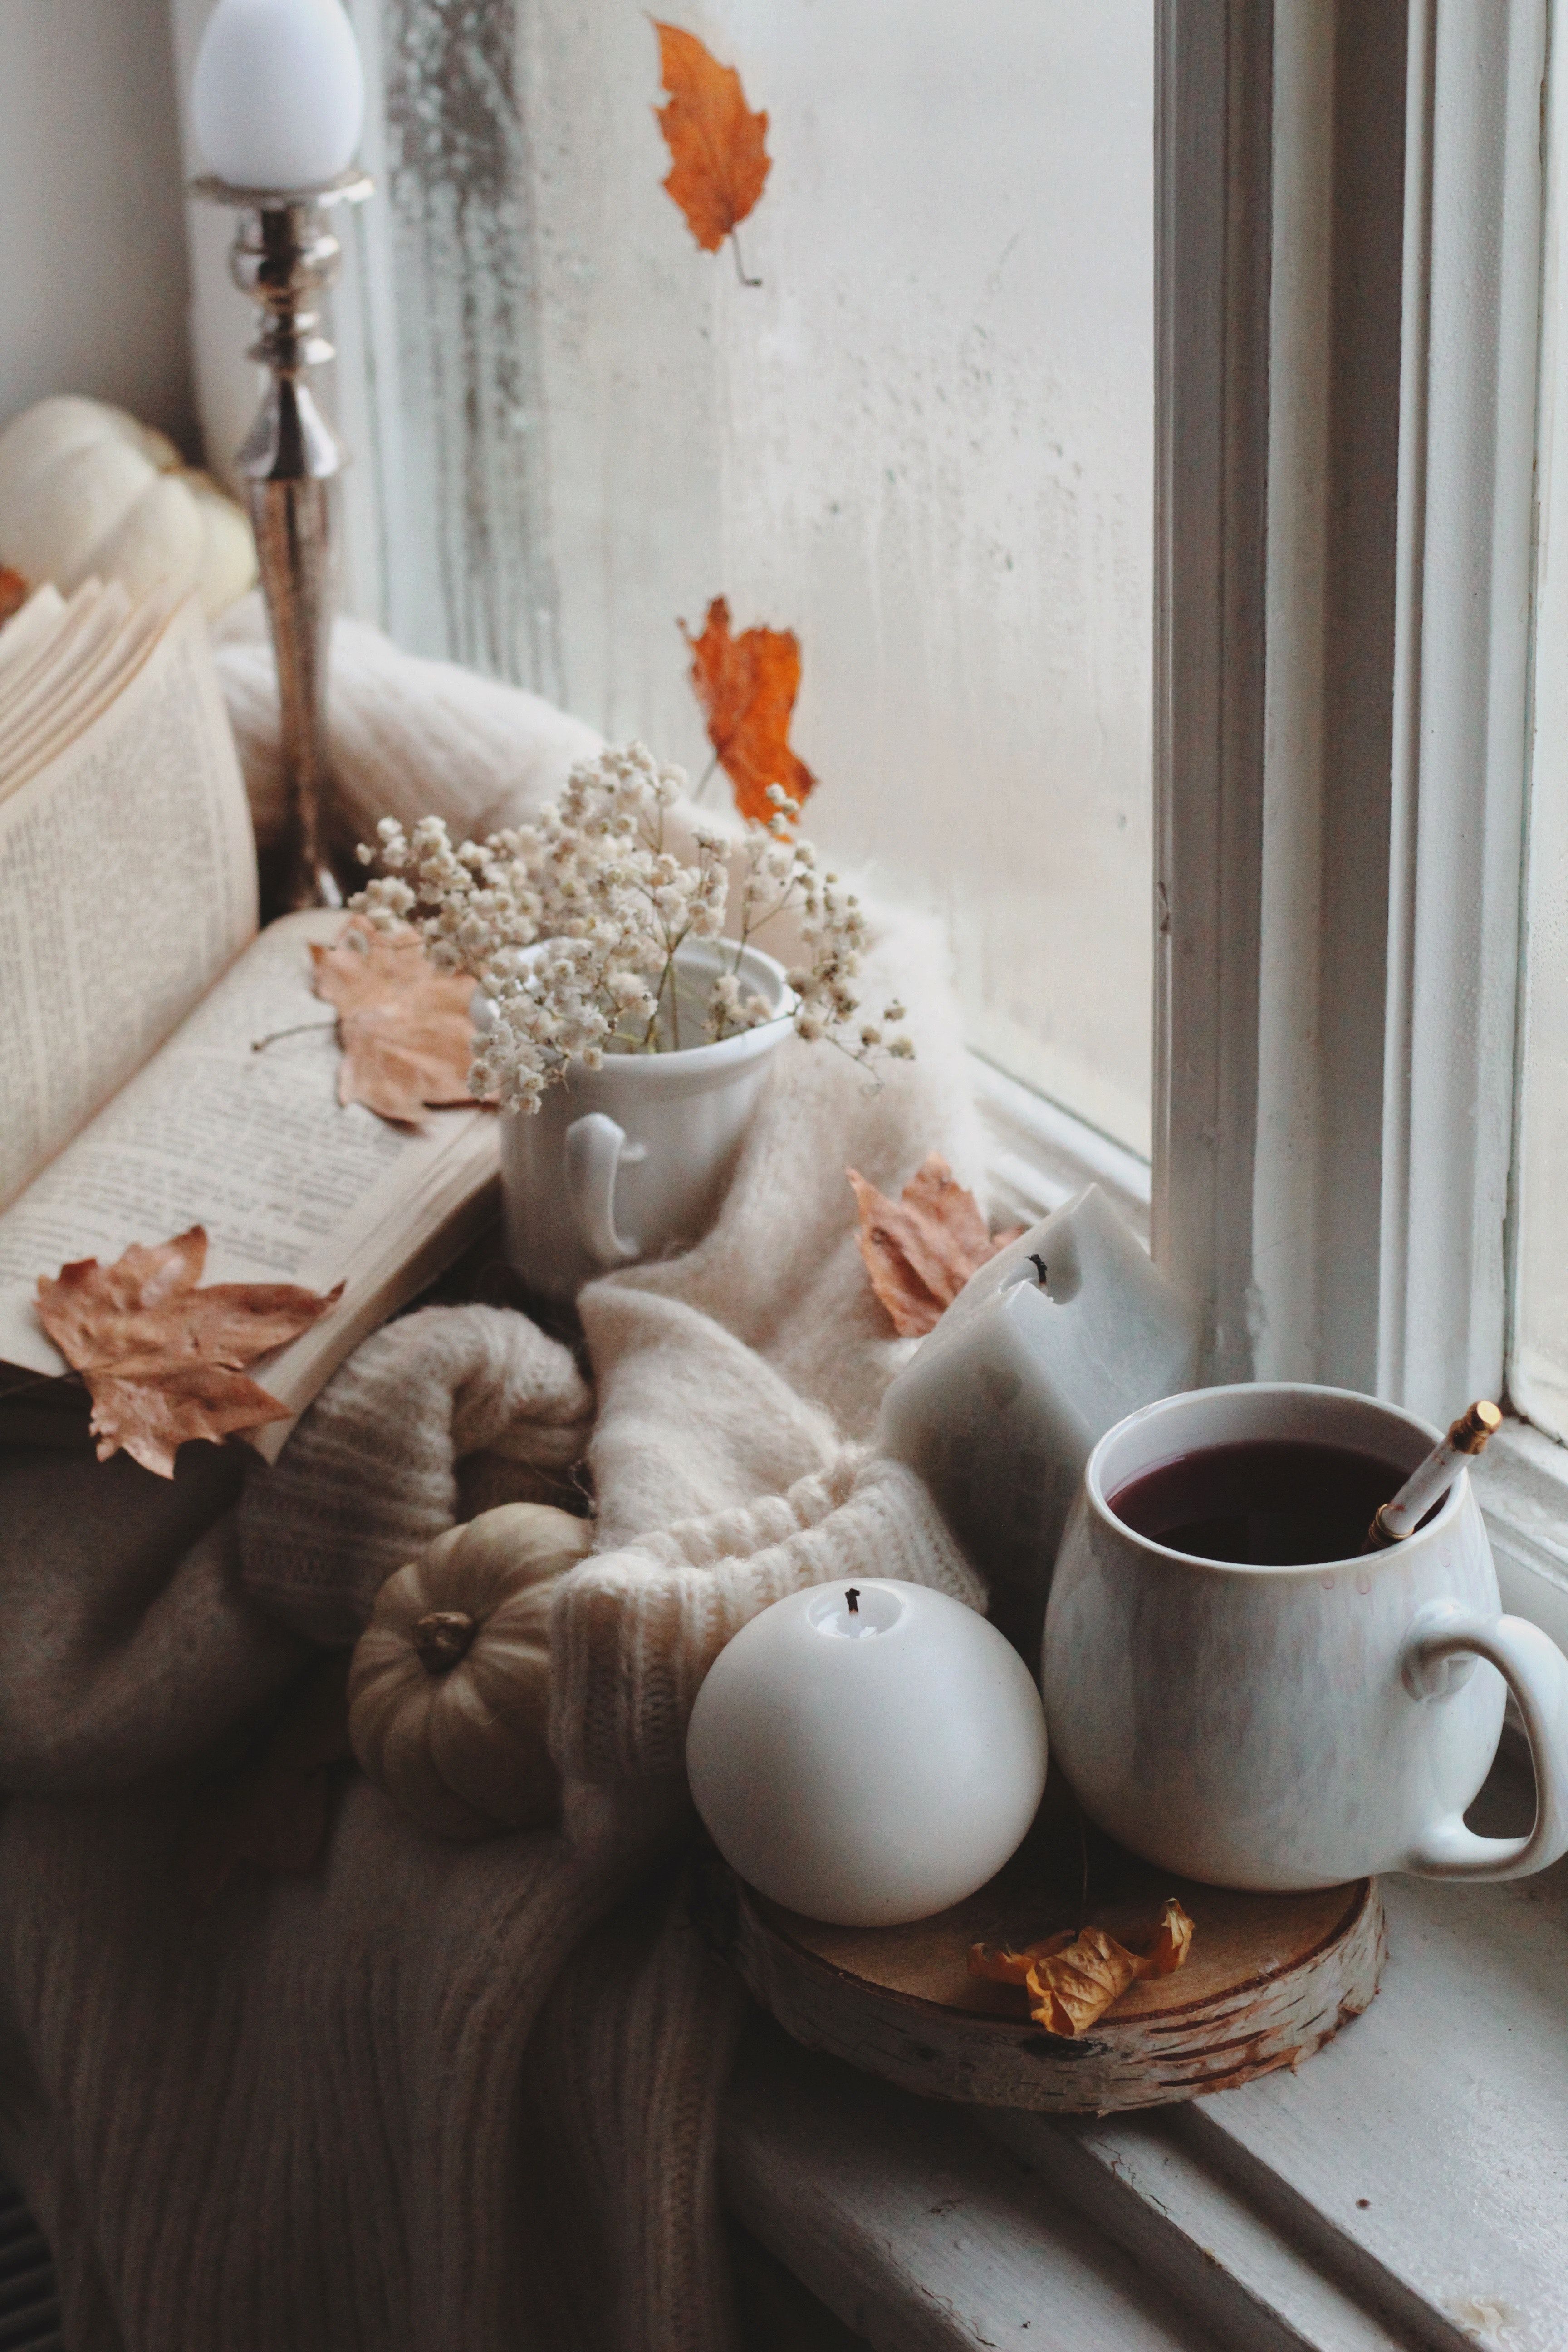 A window sill with a book, a cup of tea, a candle, and a blanket. - Cozy